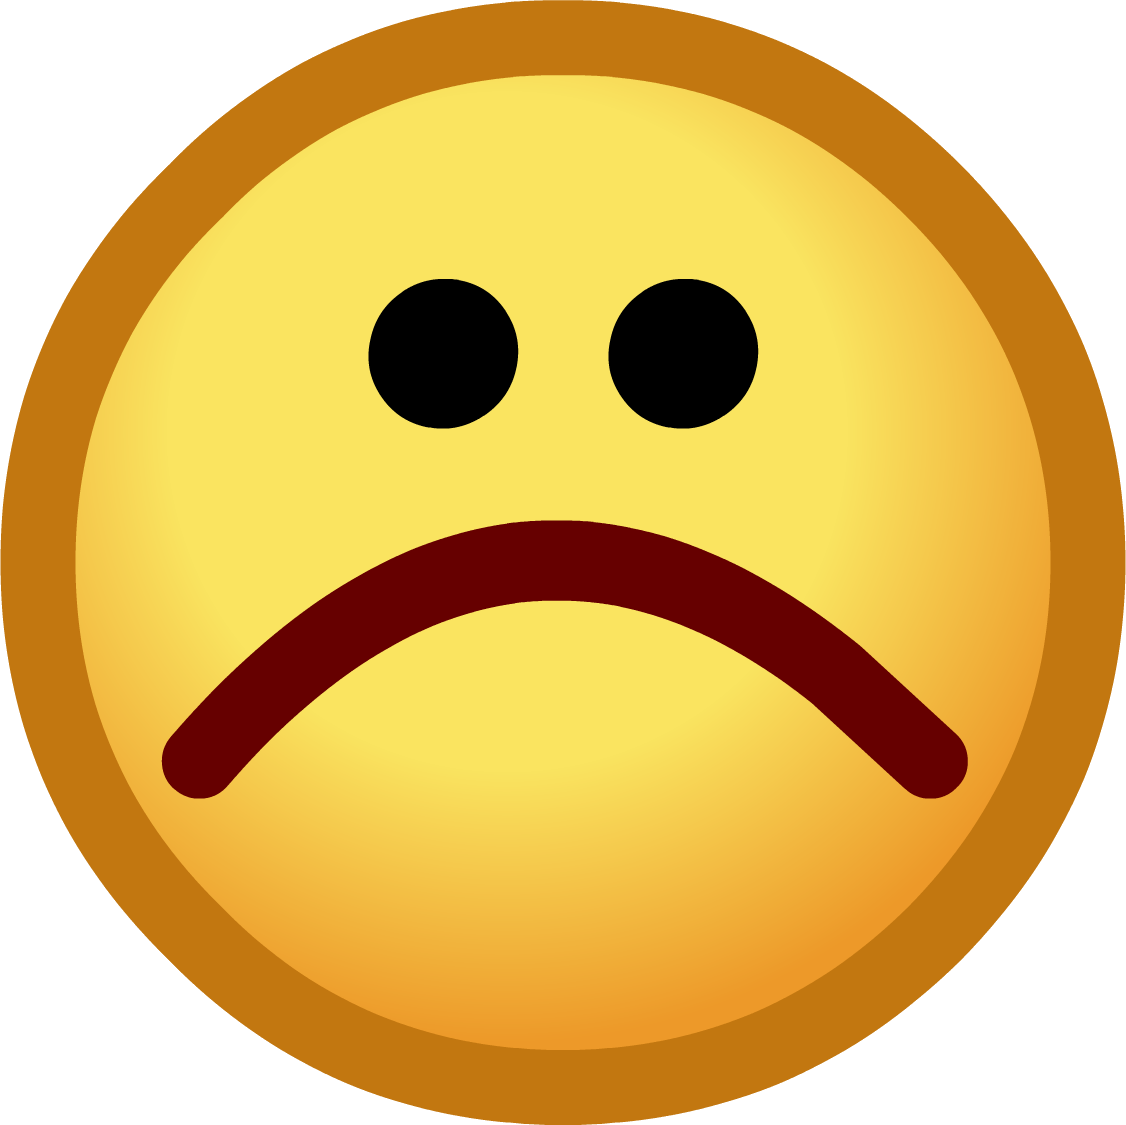 Upset Smiley Face Images & Pictures - Becuo